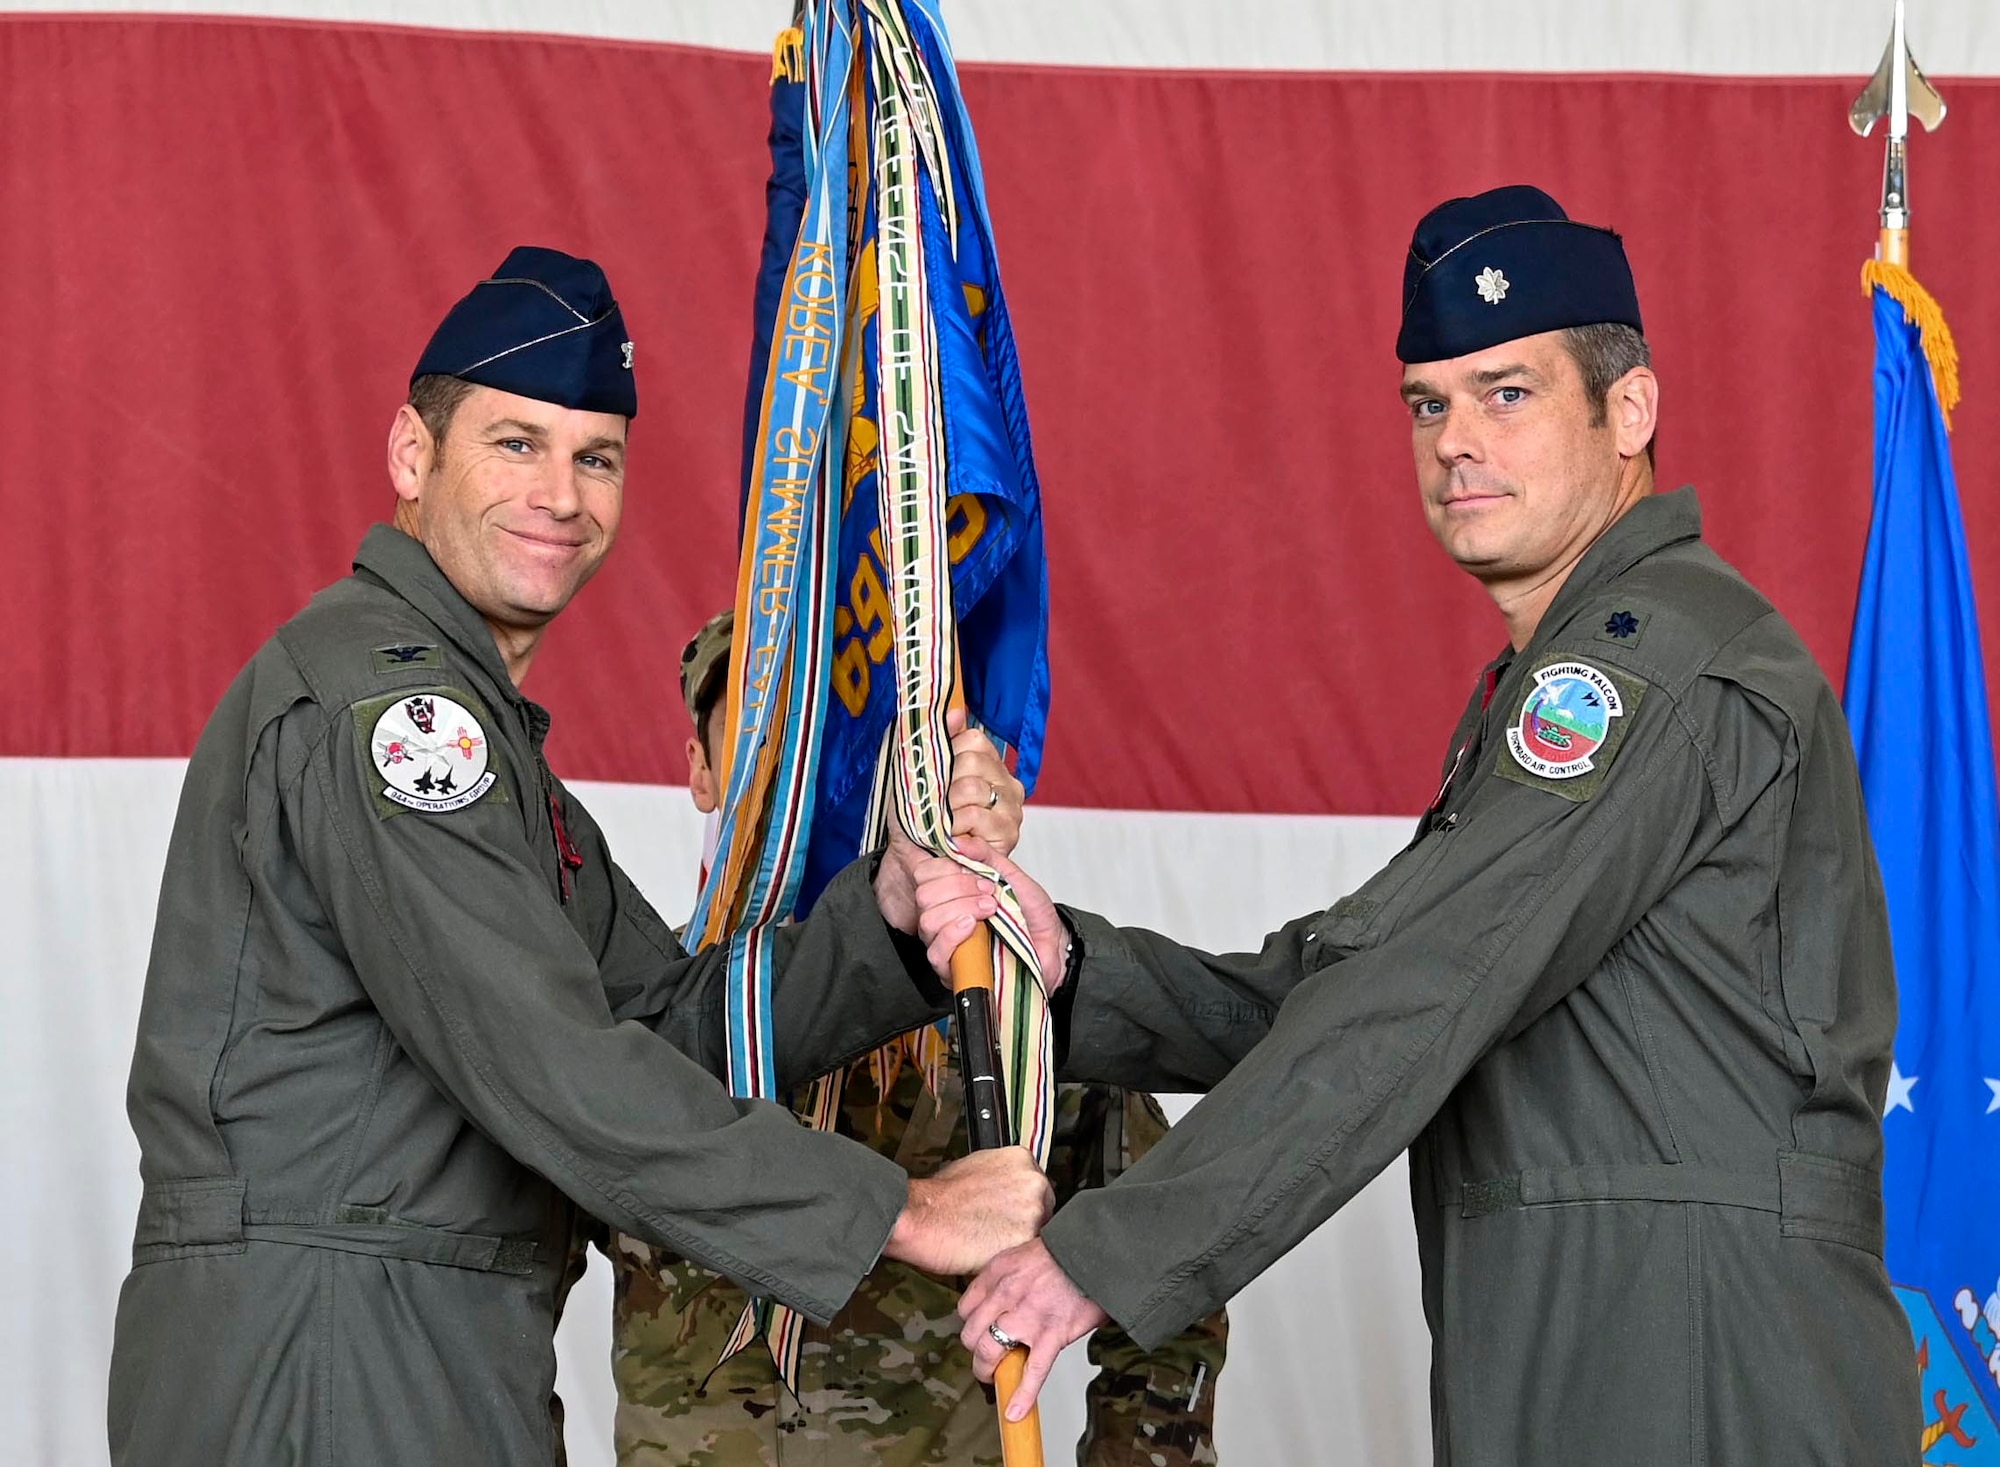 Reserve Citizen Airman Lt Col Aaron Weedman assumes command of the 69th Fighter Squadron during an official ceremony on Luke Air Force Base, Ariz., March 4, 2022. The 69th FS was activated on January 15, 1941 as the 69th Pursuit Group and since have returned to their roots by training the world’s greatest fighter pilots while keeping with their traditions of honor, bravery, and, above all, the adventuring spirit of The Fighting 69th. (U.S. Air Force photo/ Staff Sgt. Matthew Bruch)